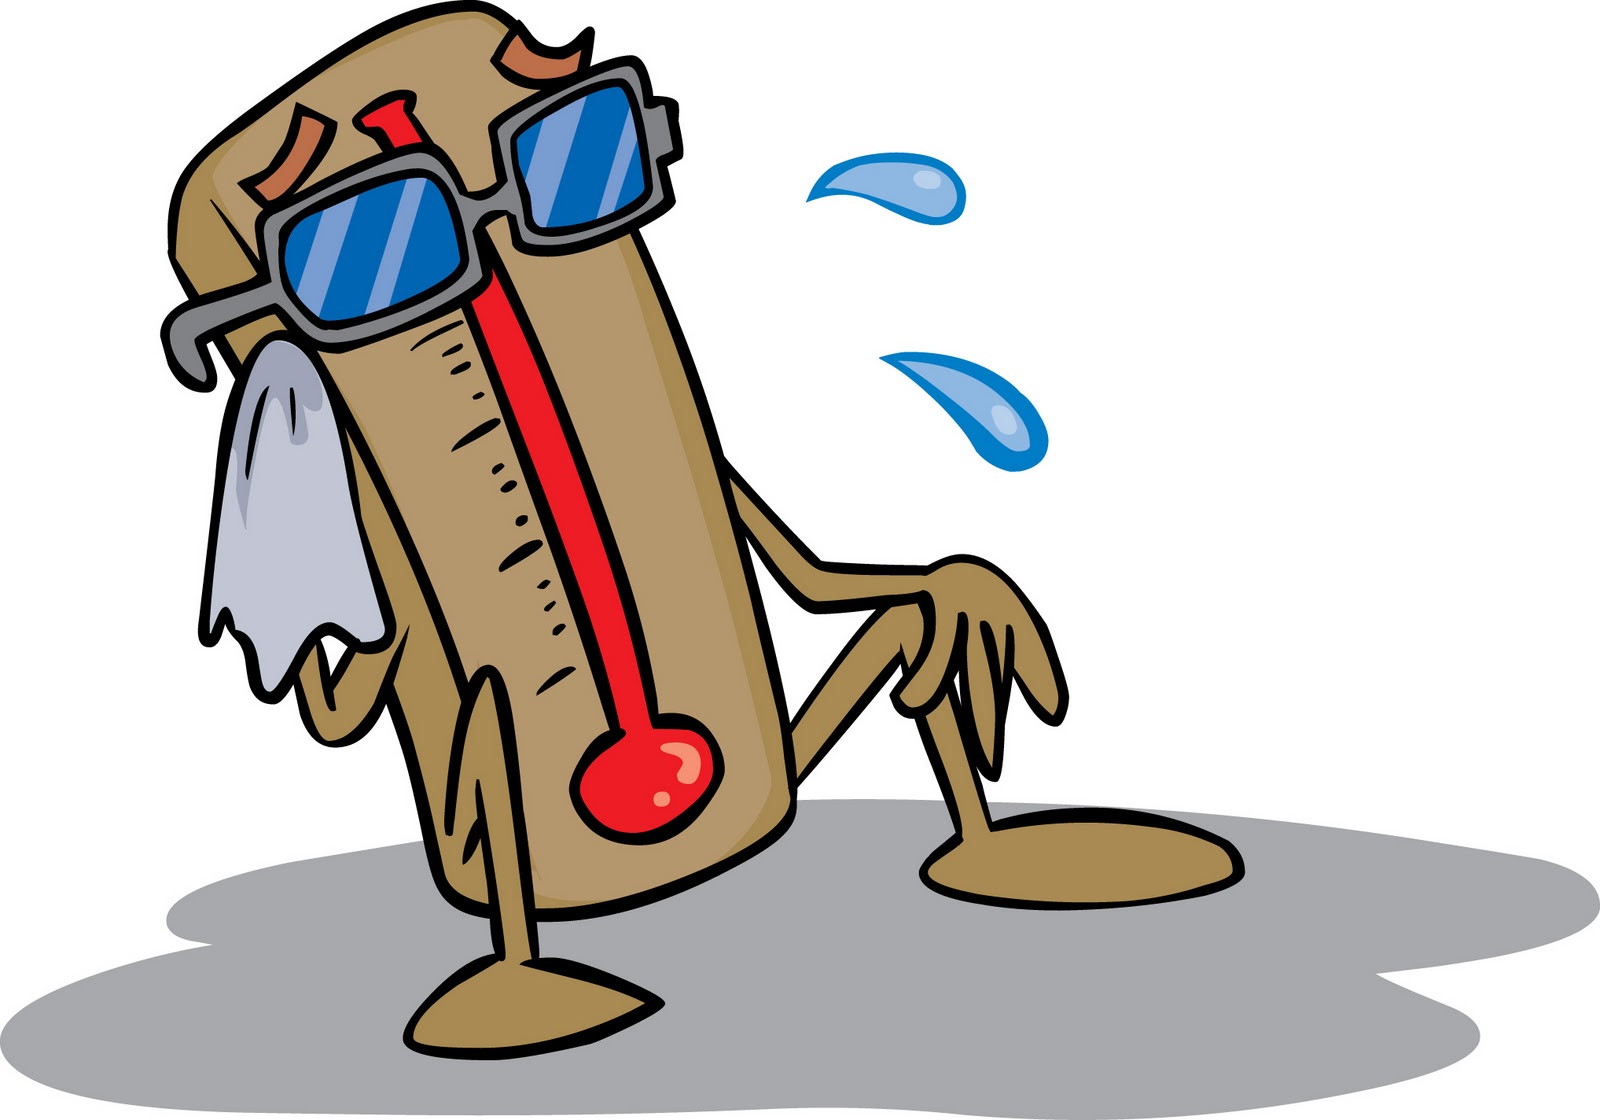 Weather Thermometer Hot | Clipart Panda - Free Clipart Images